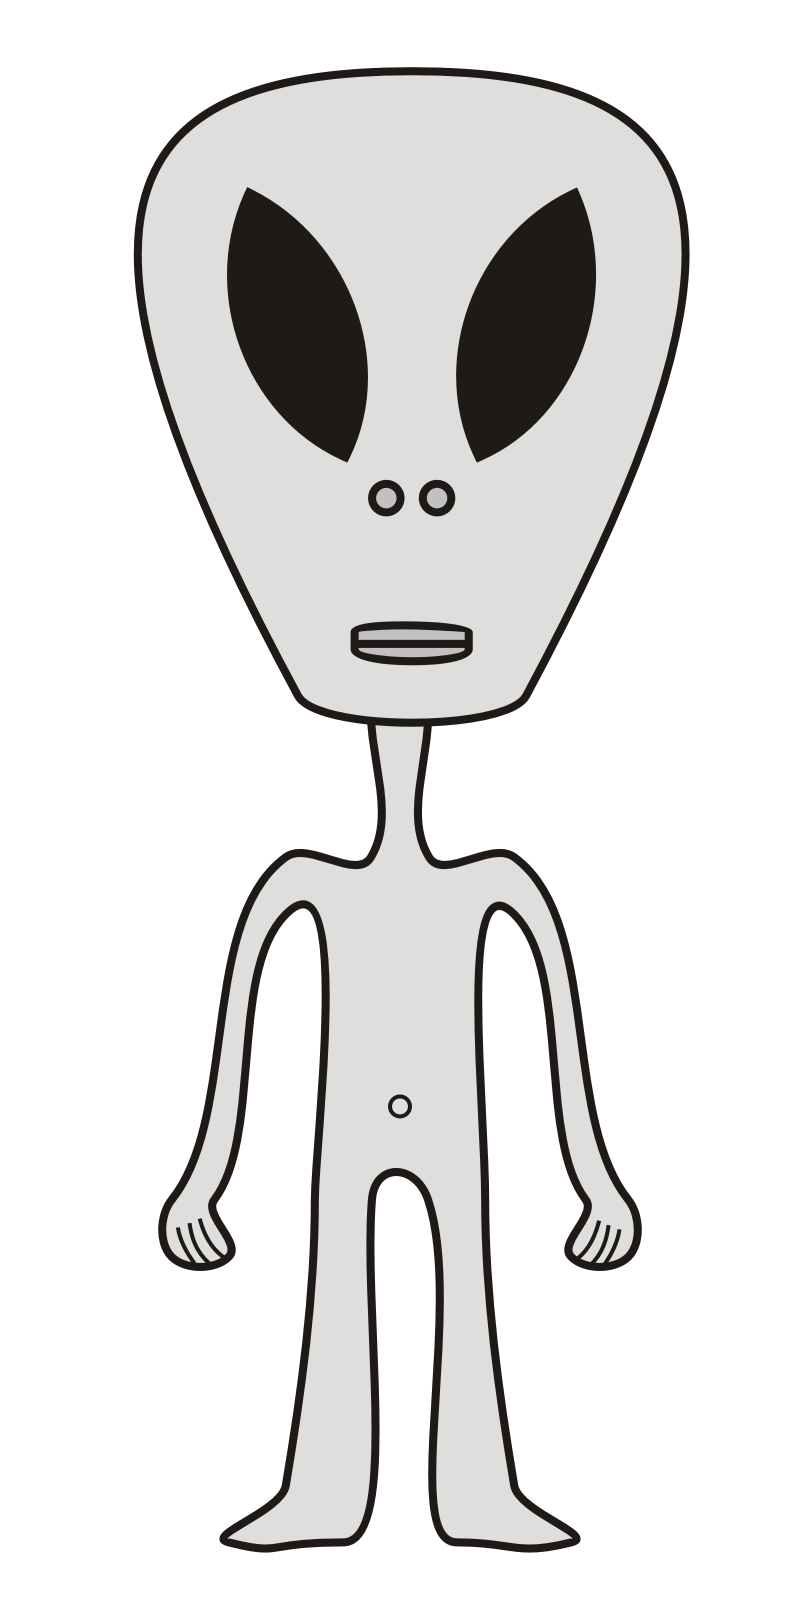 file angry grey alien wikimedia commons #22382